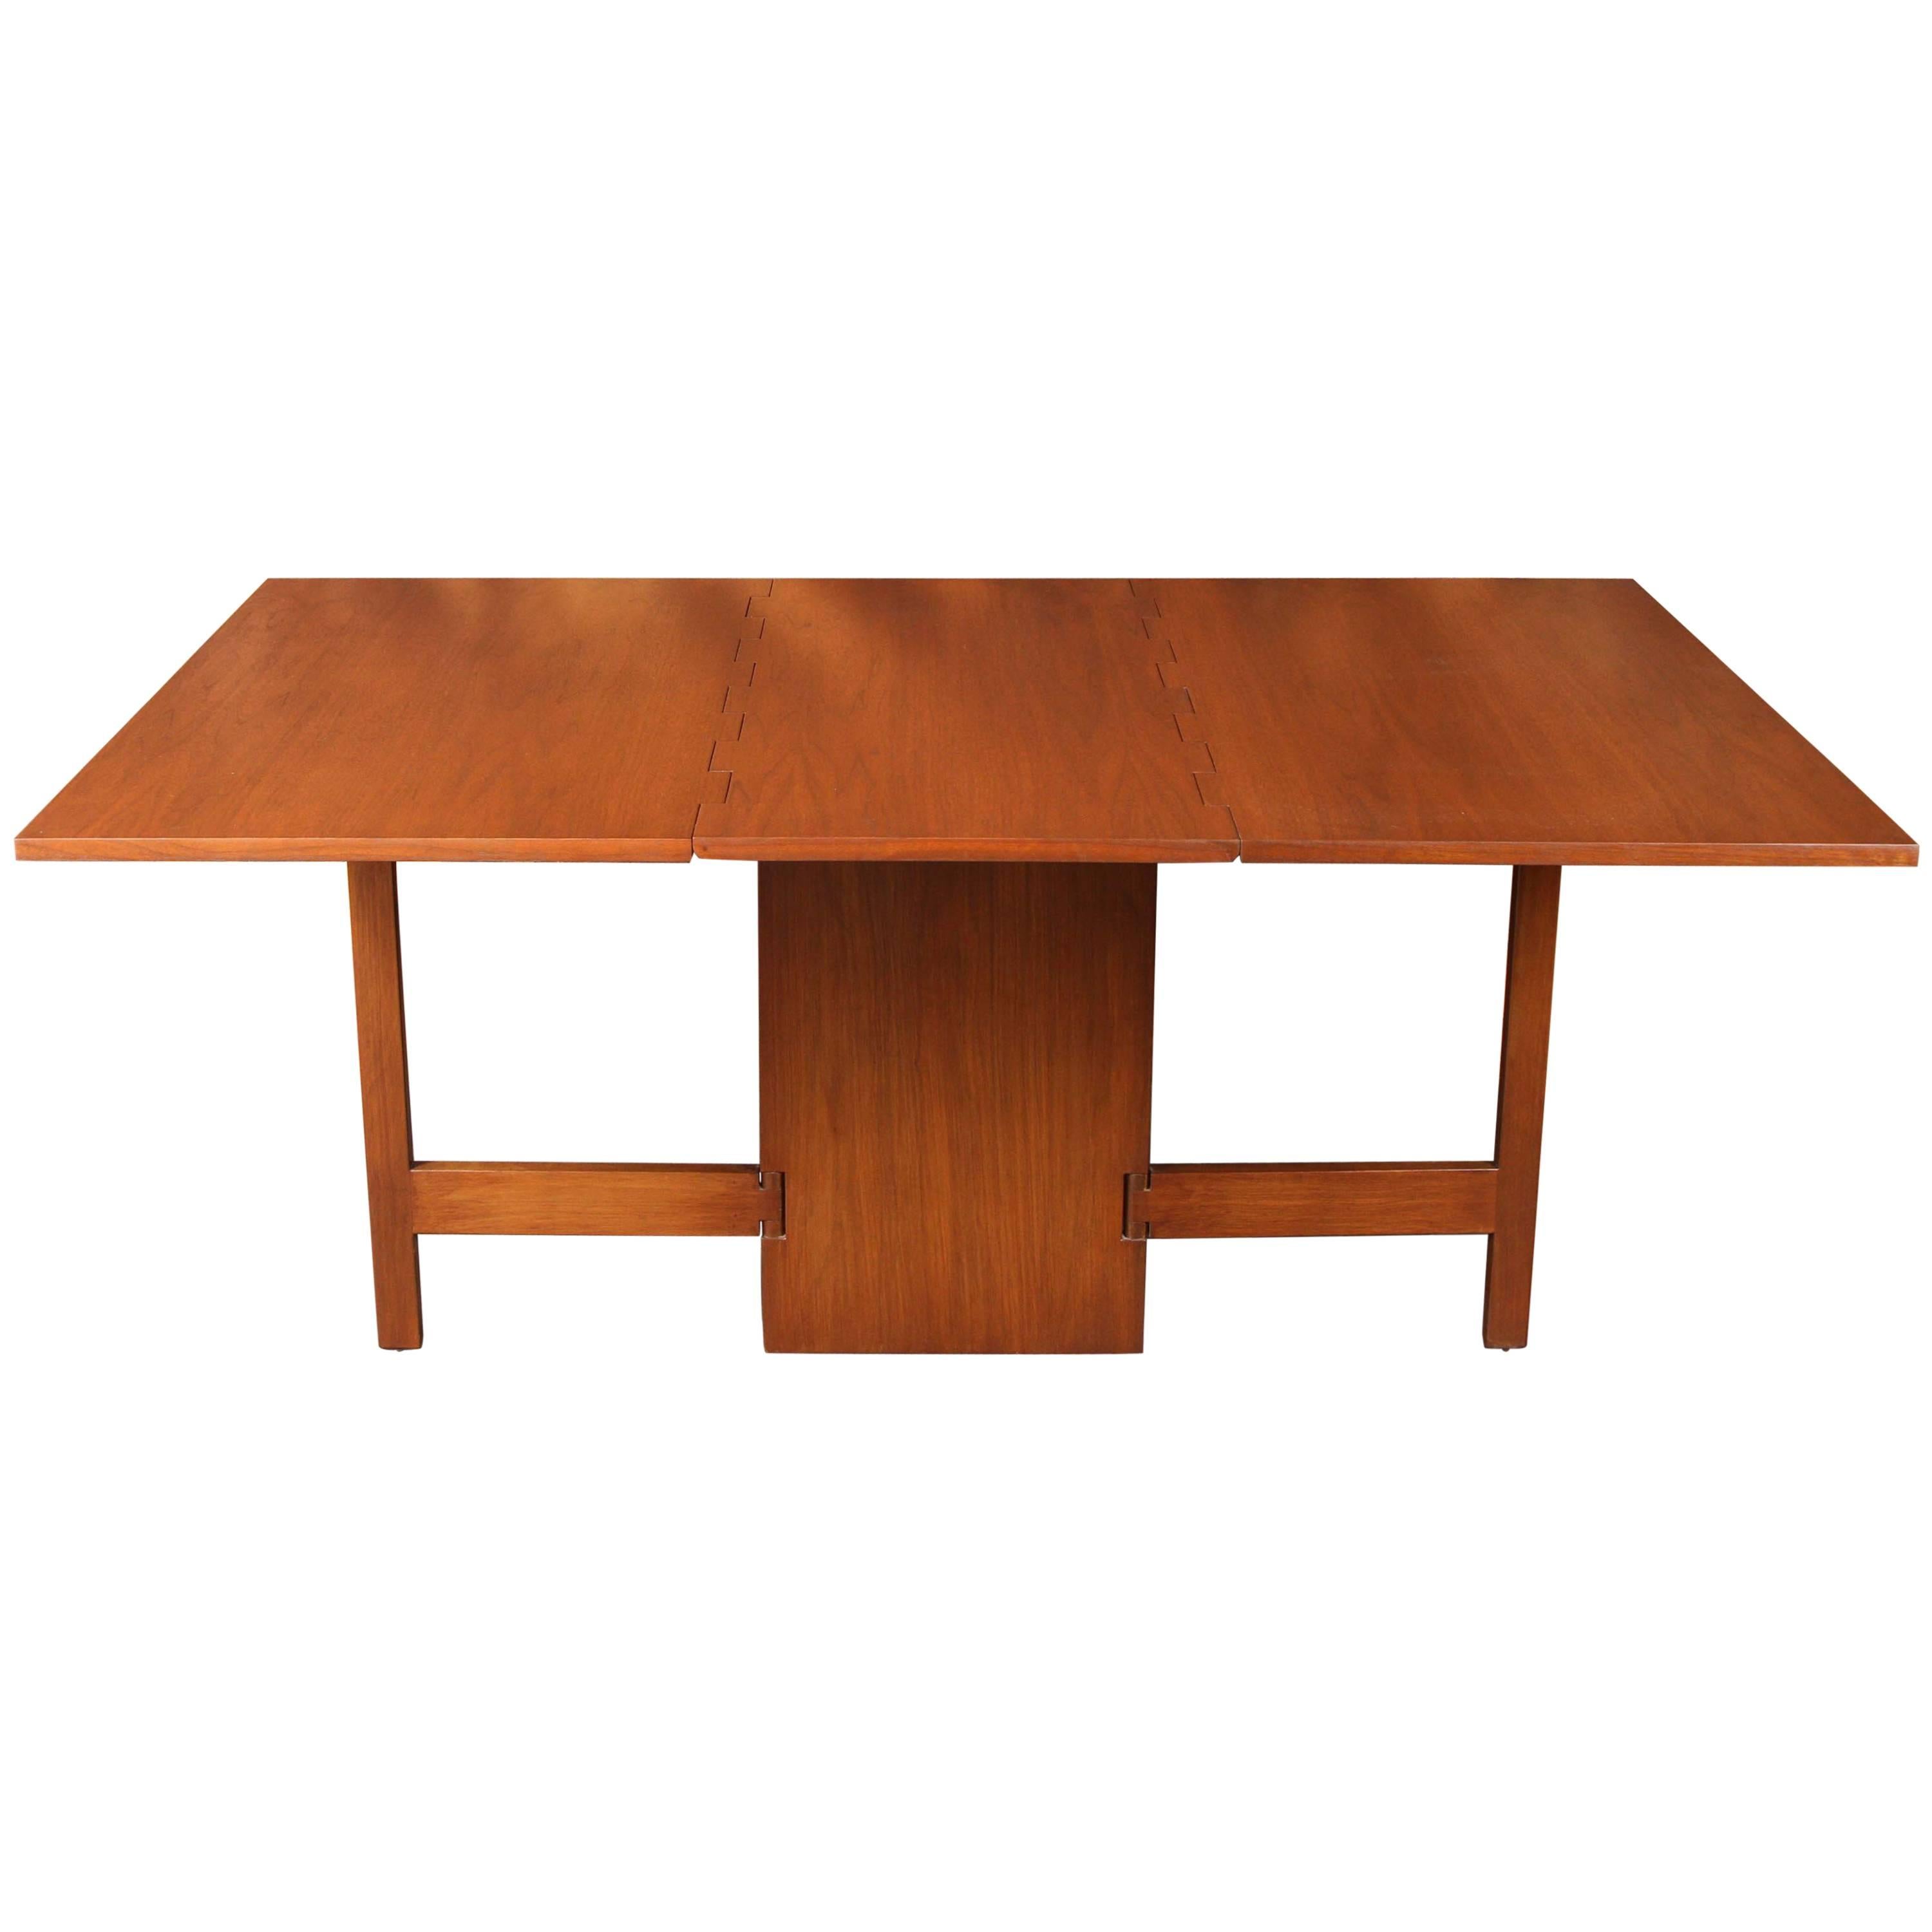 George Nelson for Herman Miller Refinished Walnut Dining Table